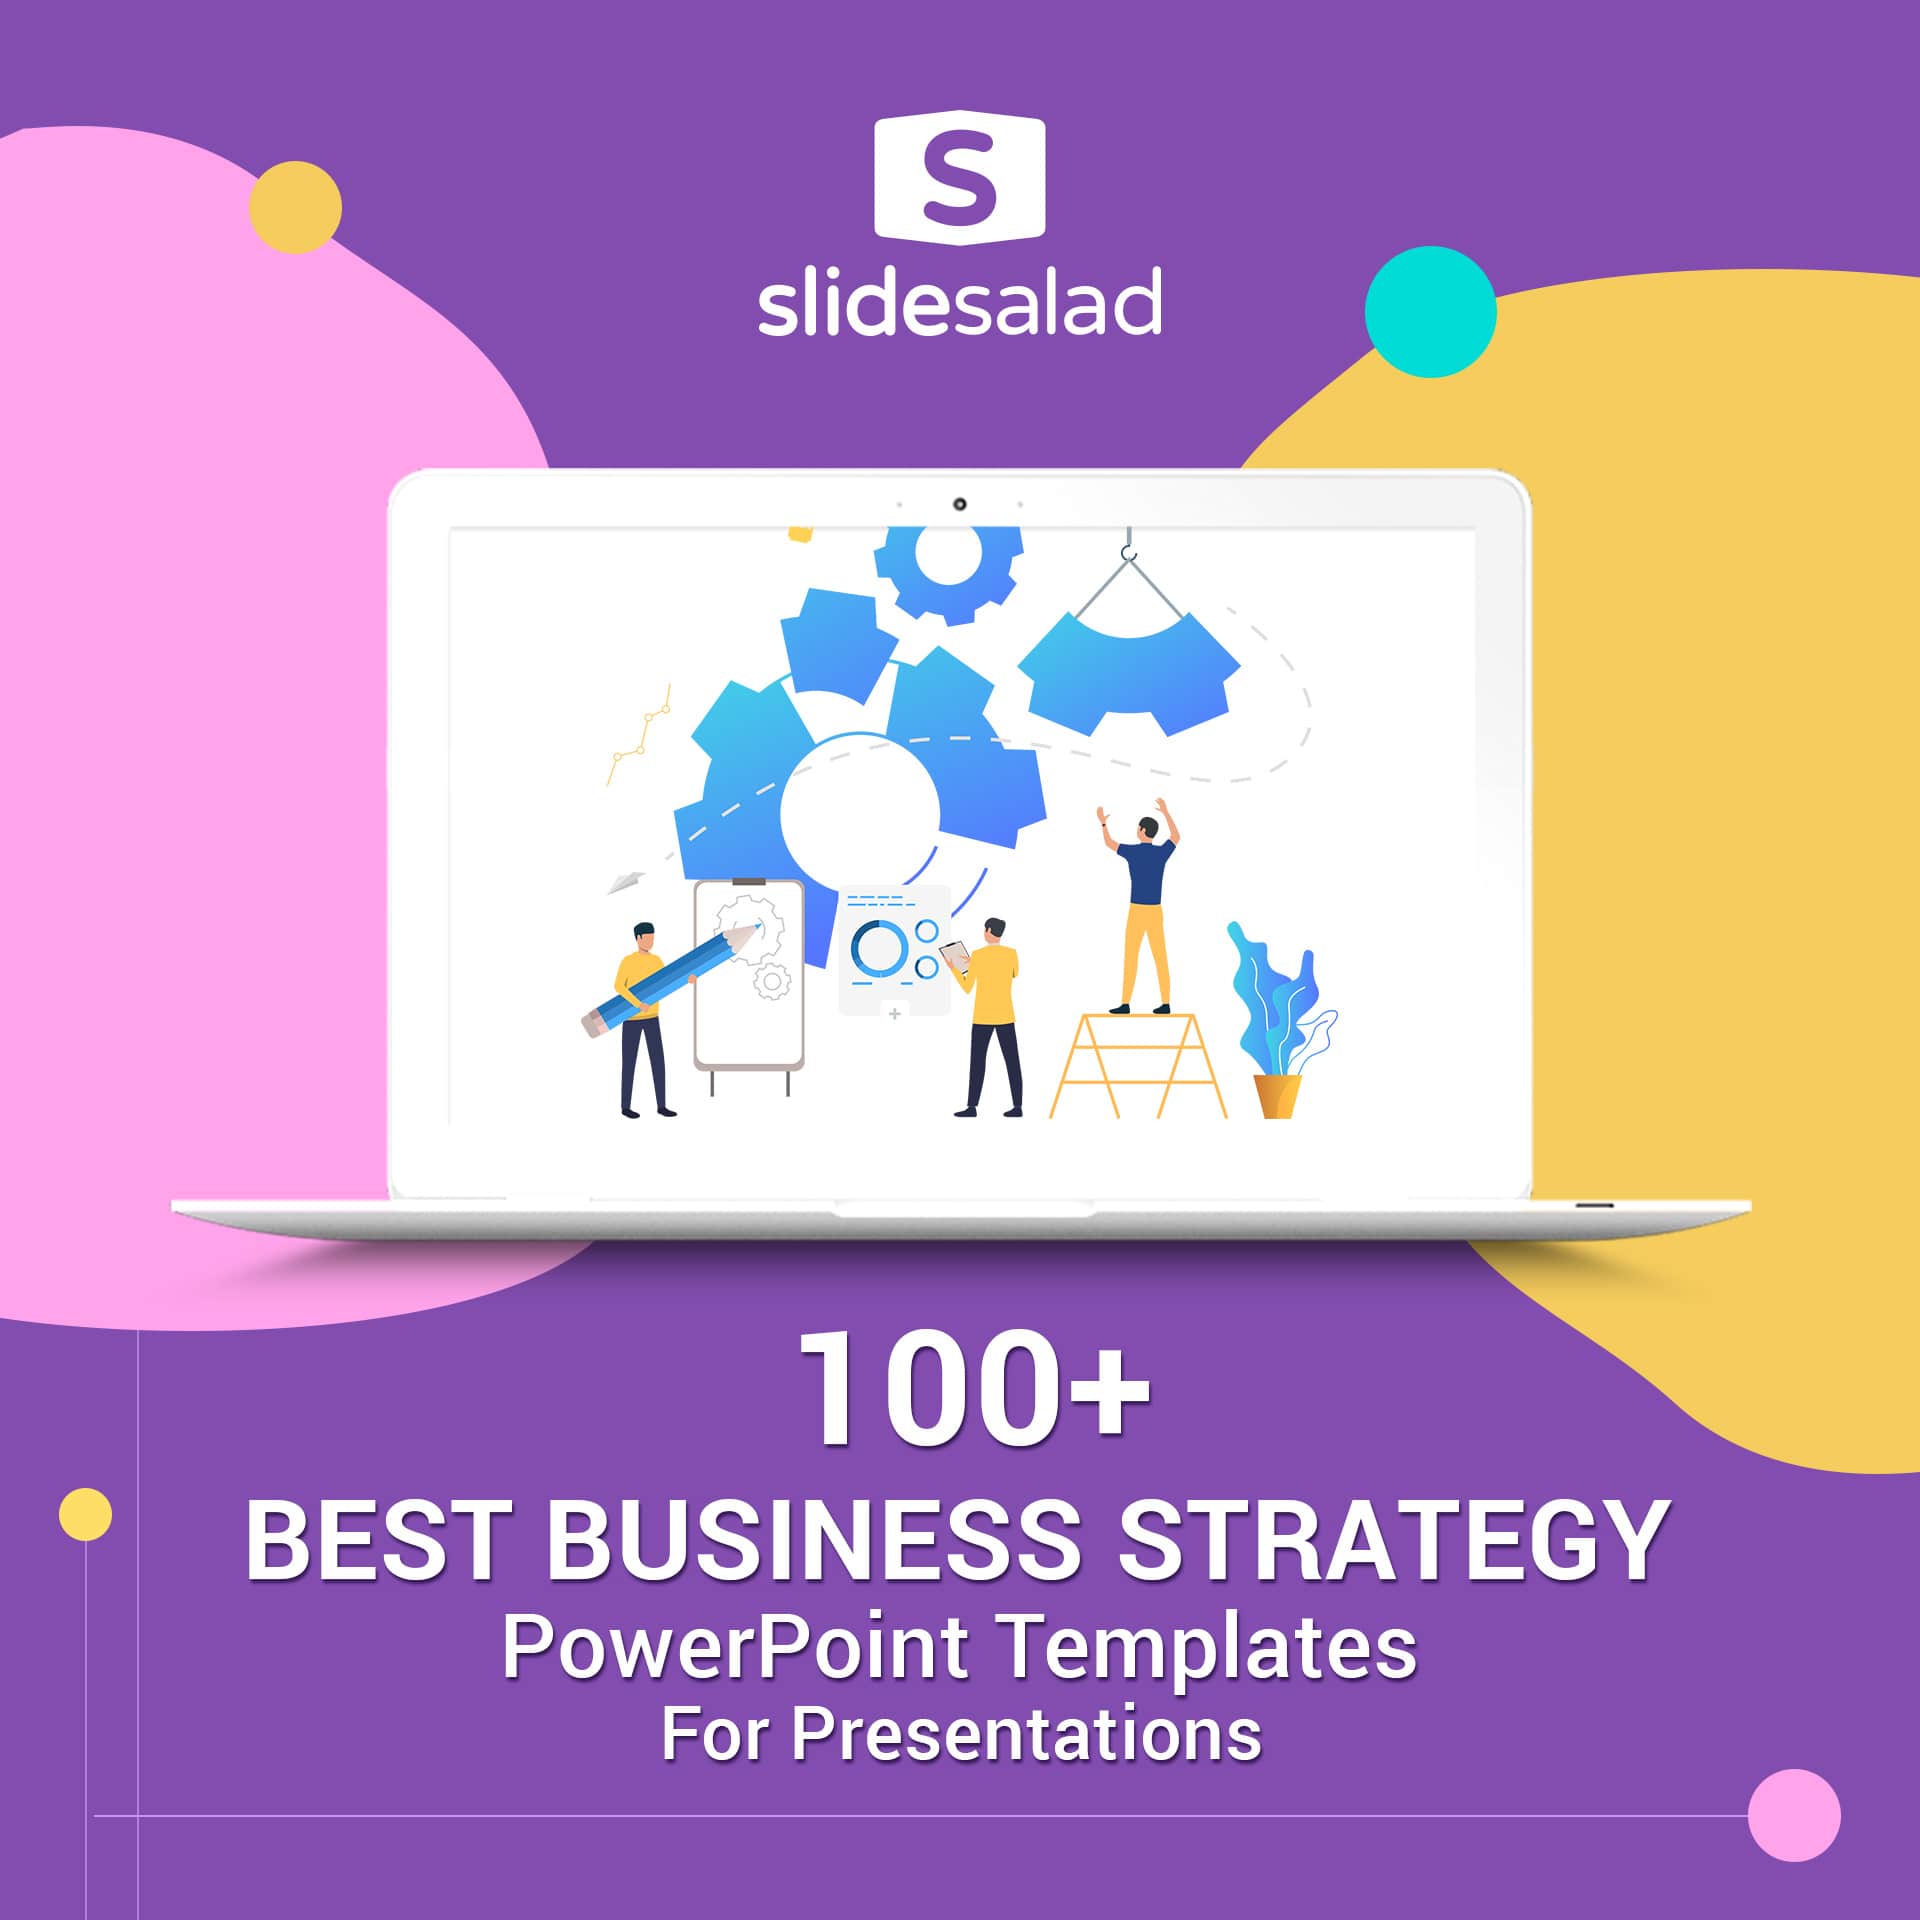 Best Business Strategy PowerPoint (PPT) Templates